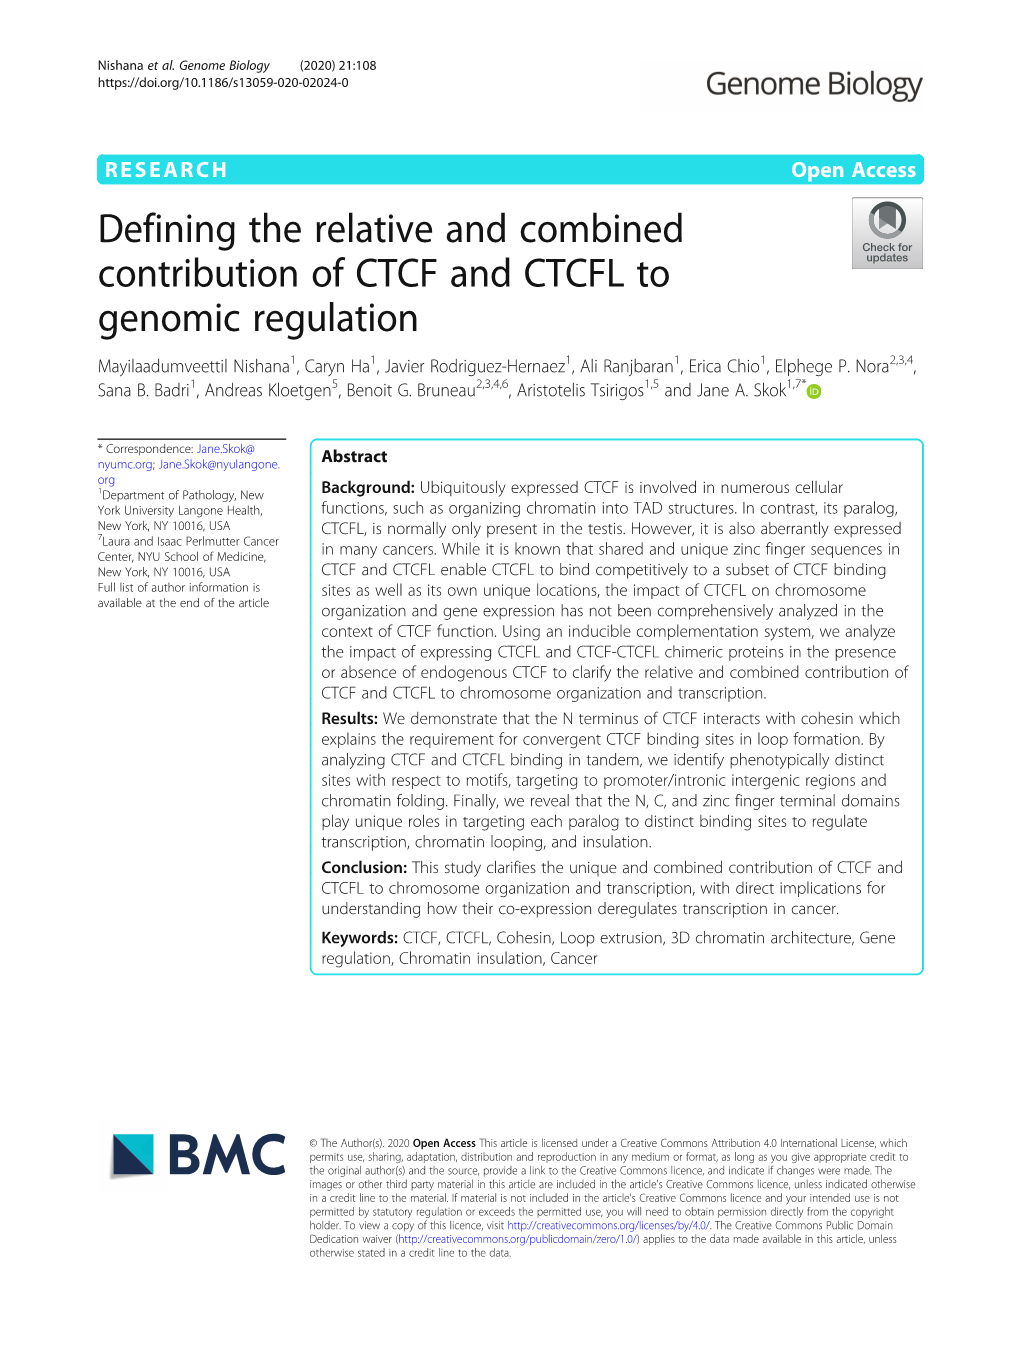 Defining the Relative and Combined Contribution of CTCF and CTCFL to Genomic Regulation